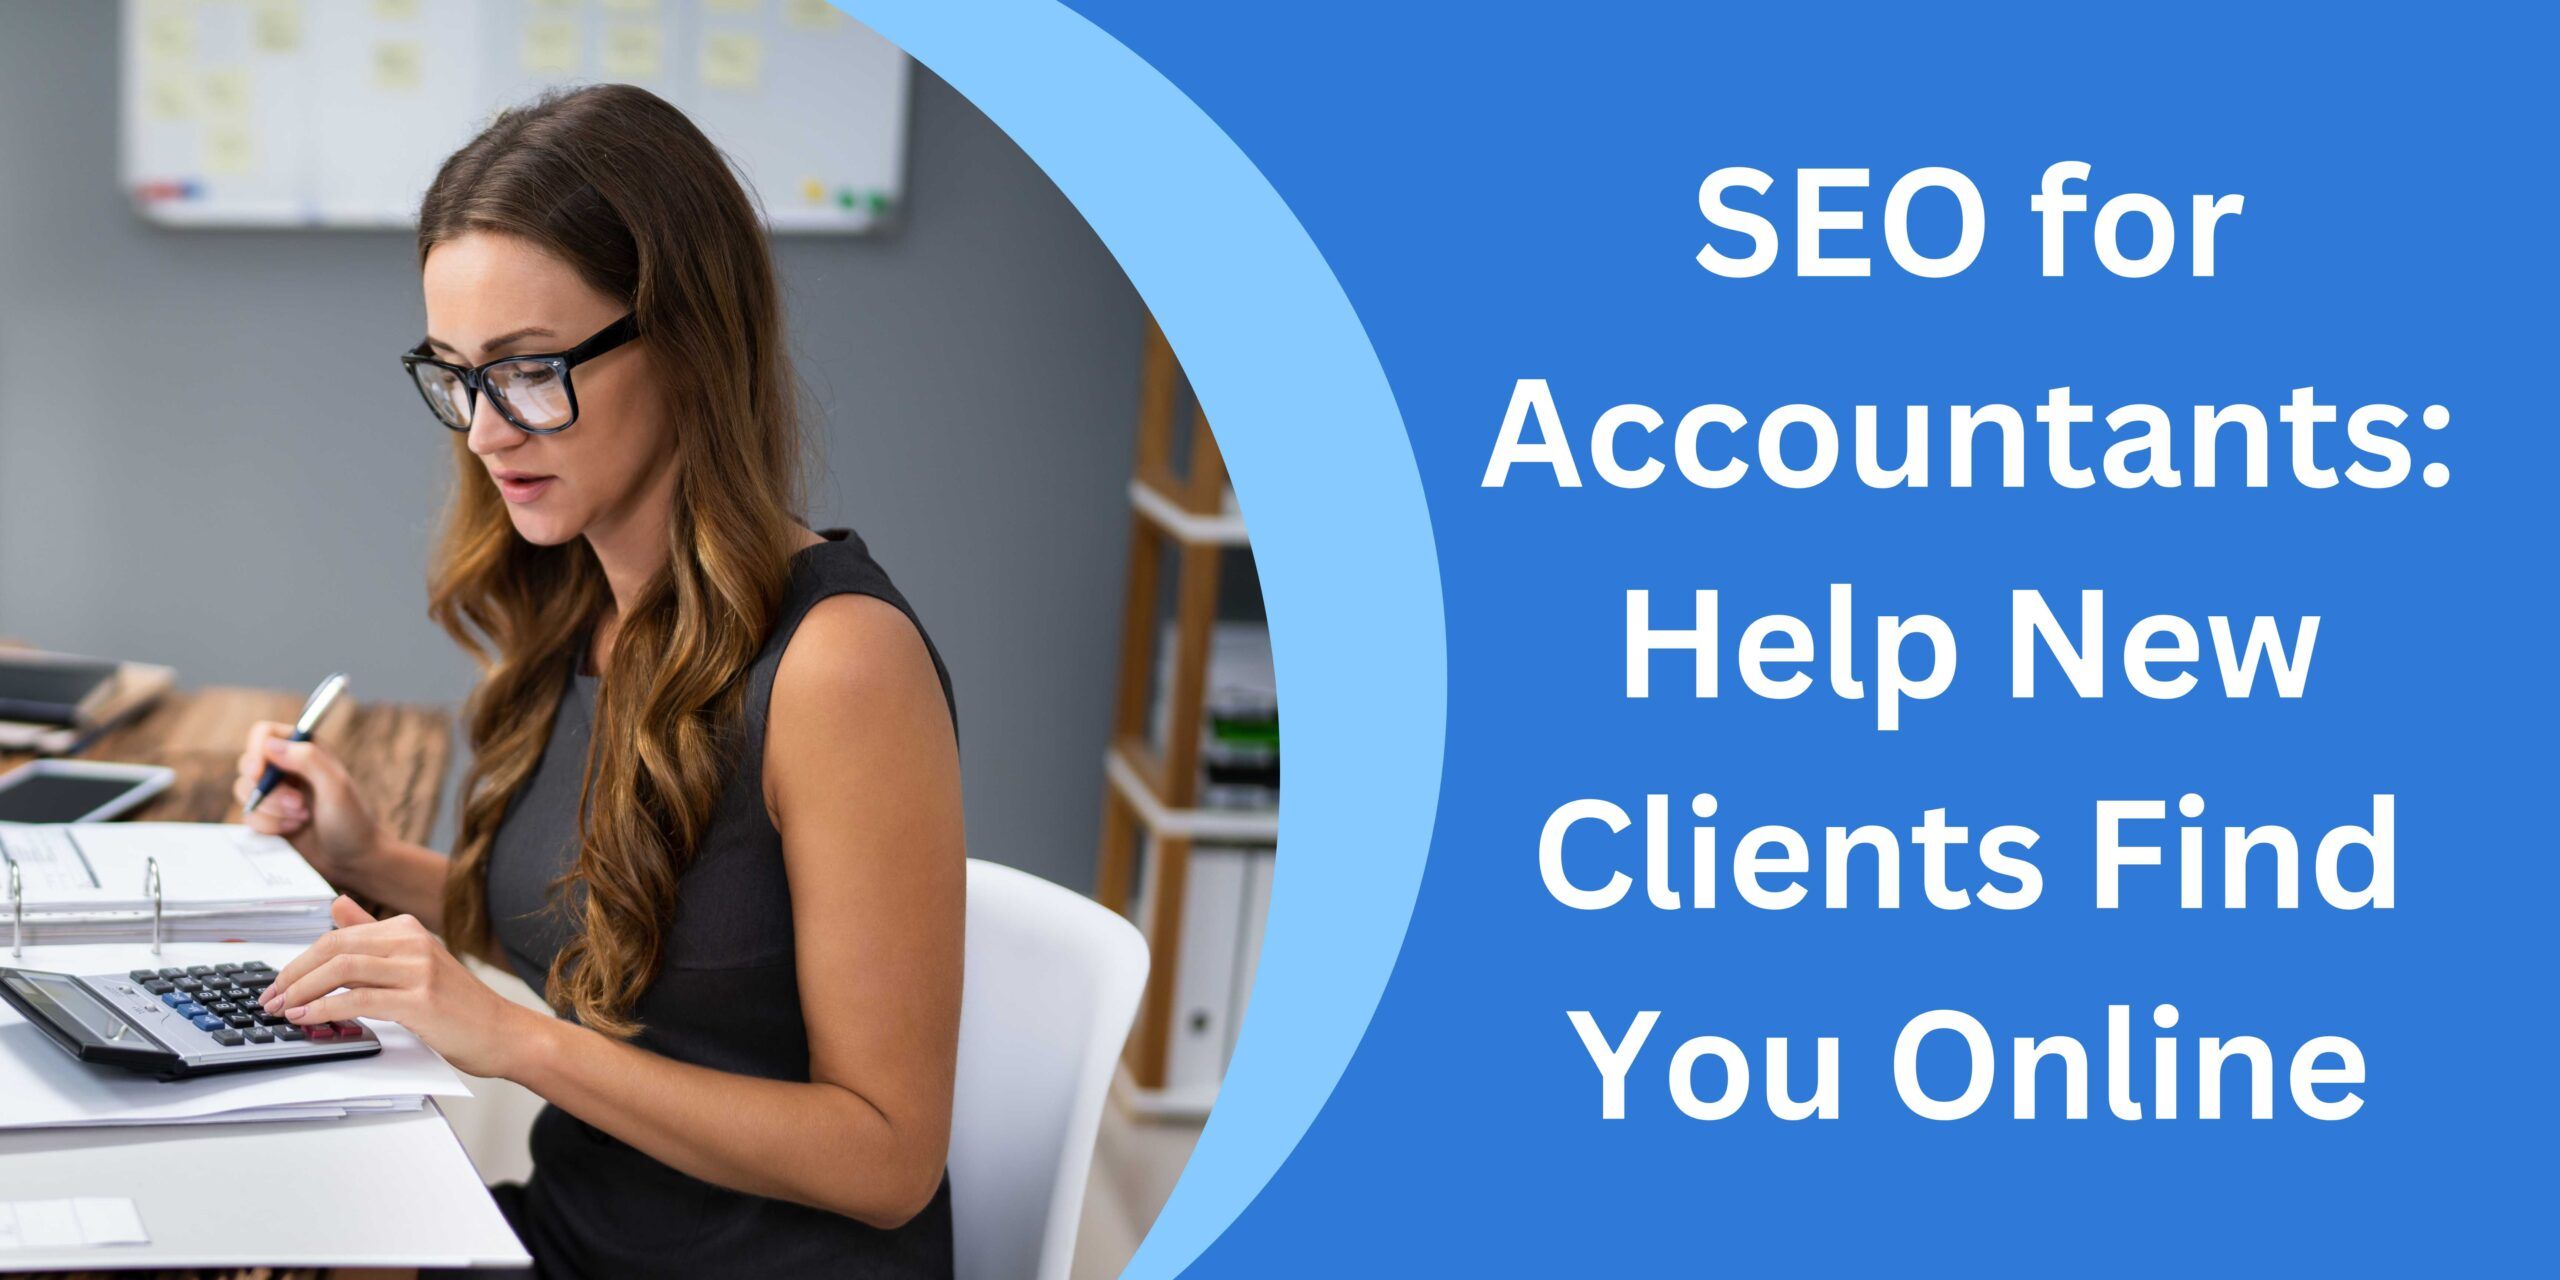 SEO for Accountants: Help New Clients Find You Online